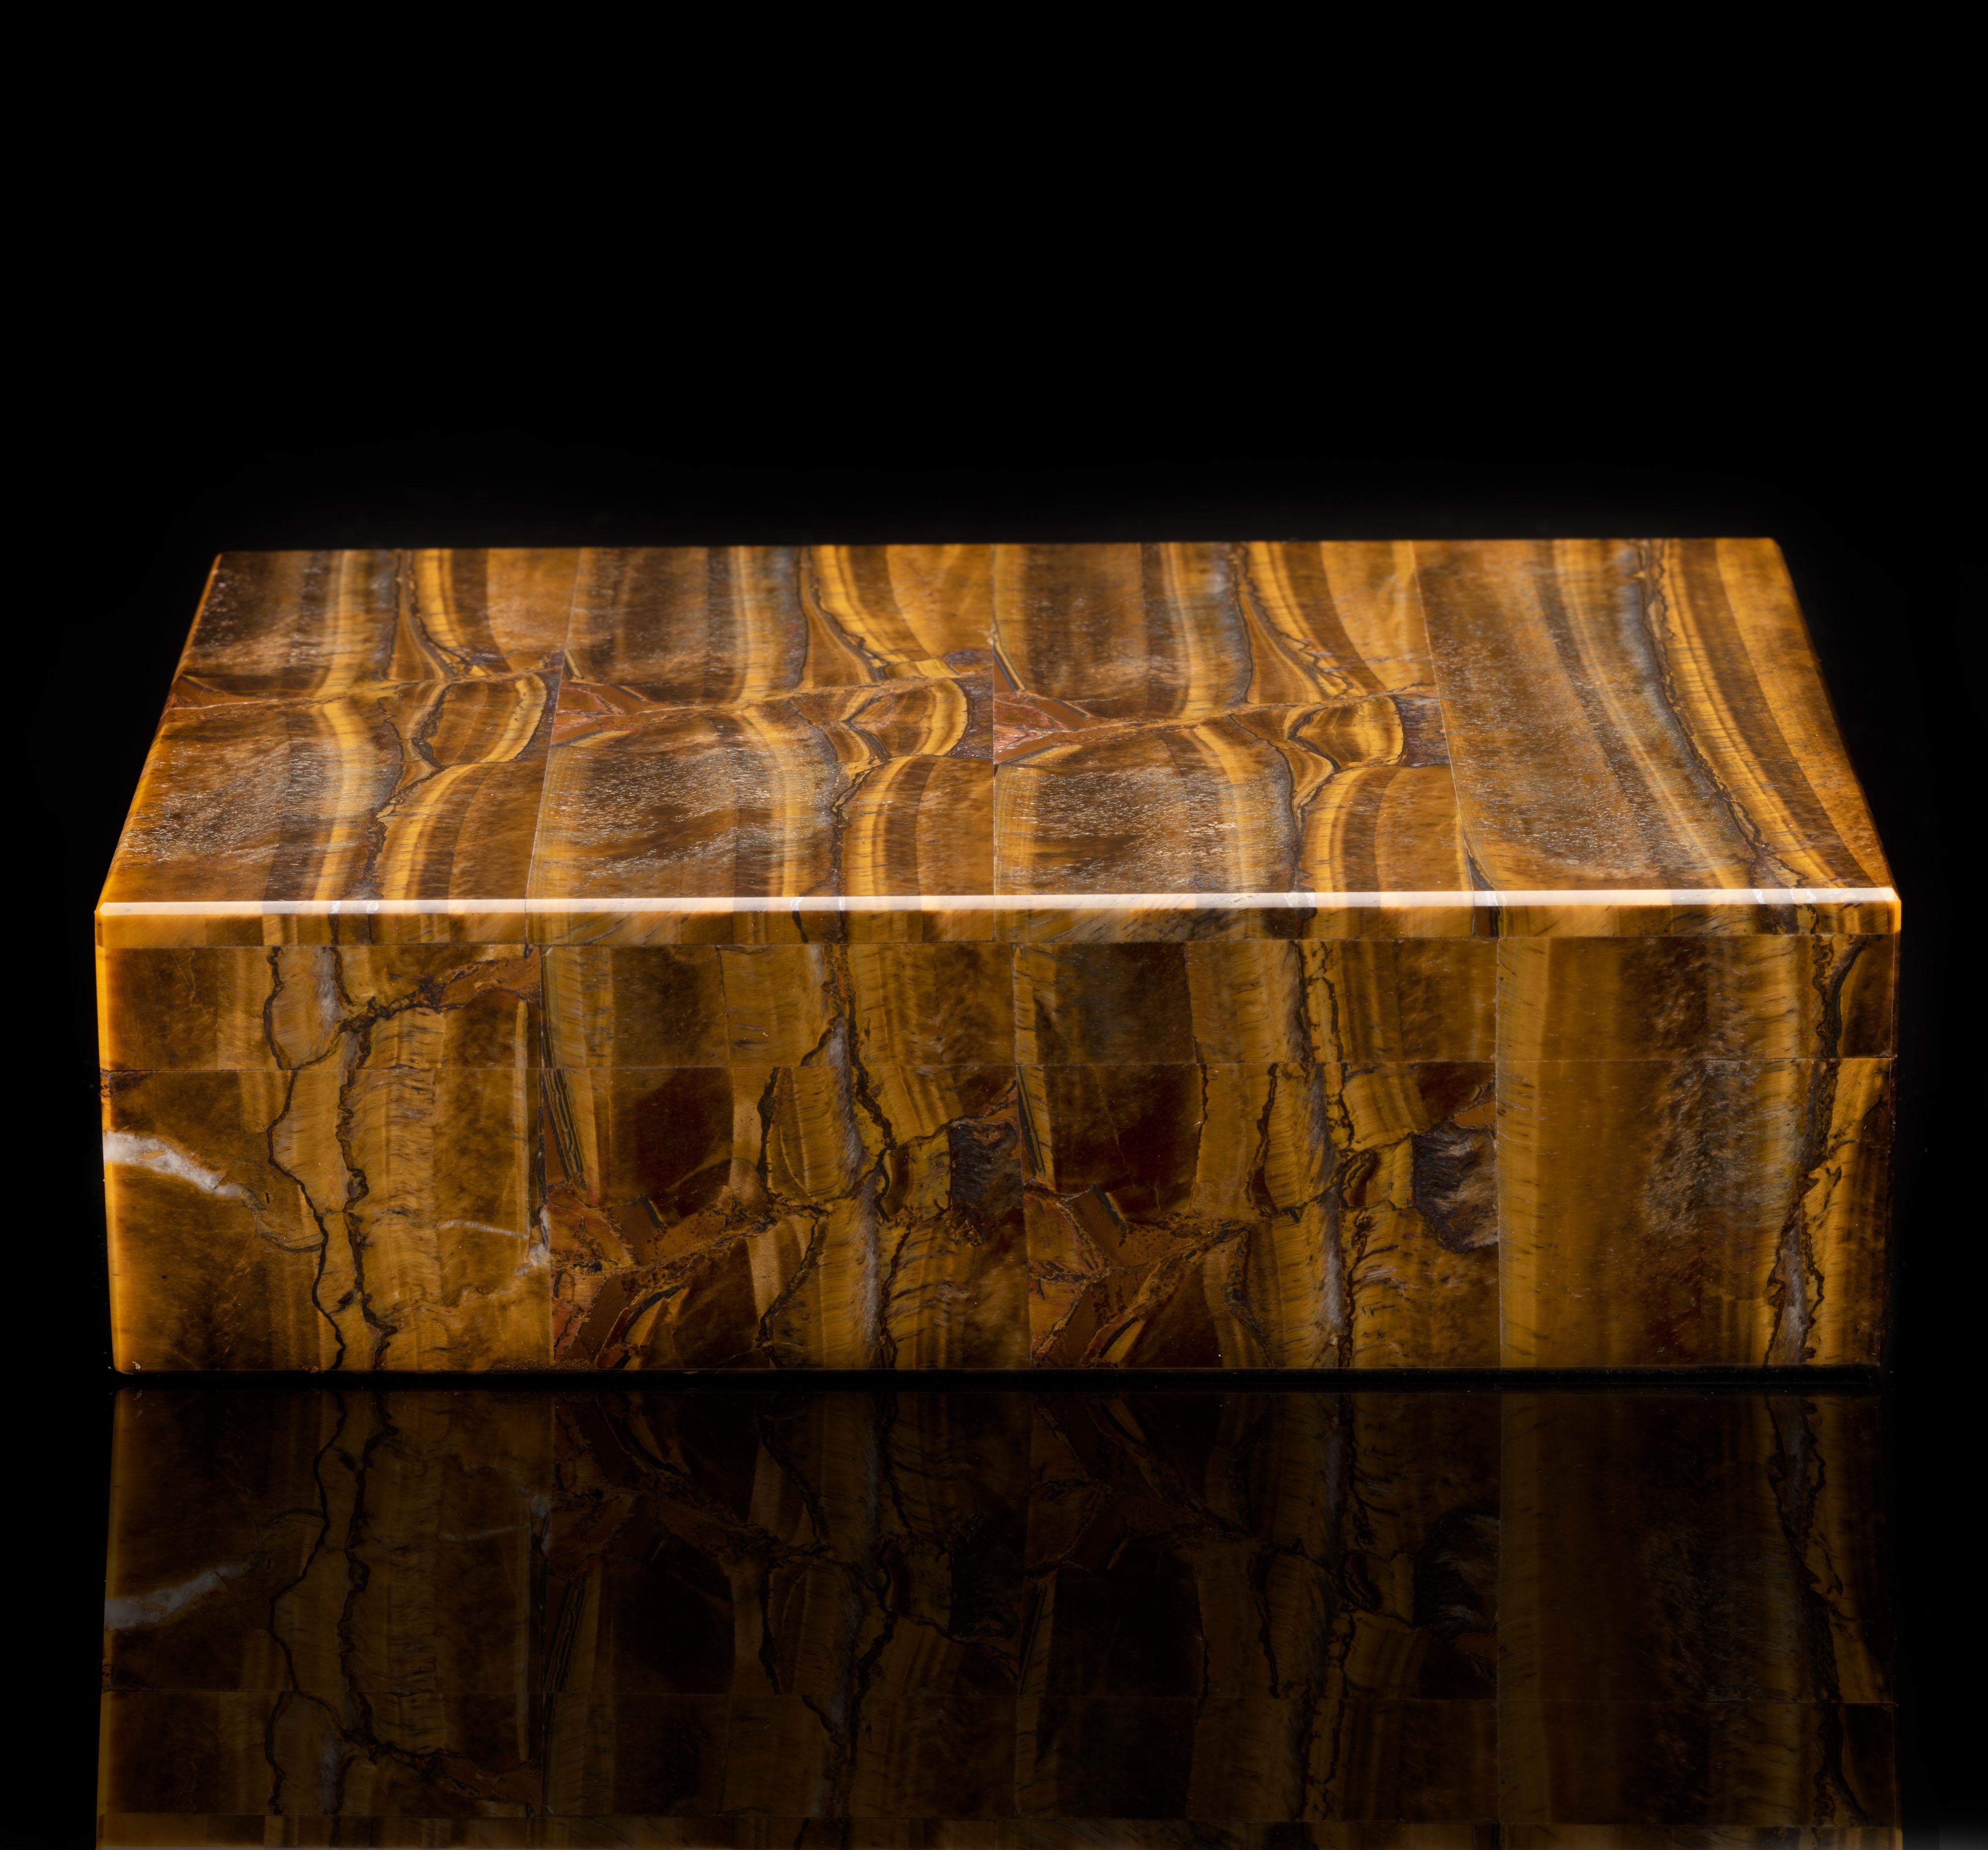 This seamlessly handcrafted box with hinged lid and brass hardware has been hand-carved and carefully hand-assembled in Italy out of the highest quality tiger's eye in gorgeous rich brown and caramel hues with incredible chatoyance. Weighing over